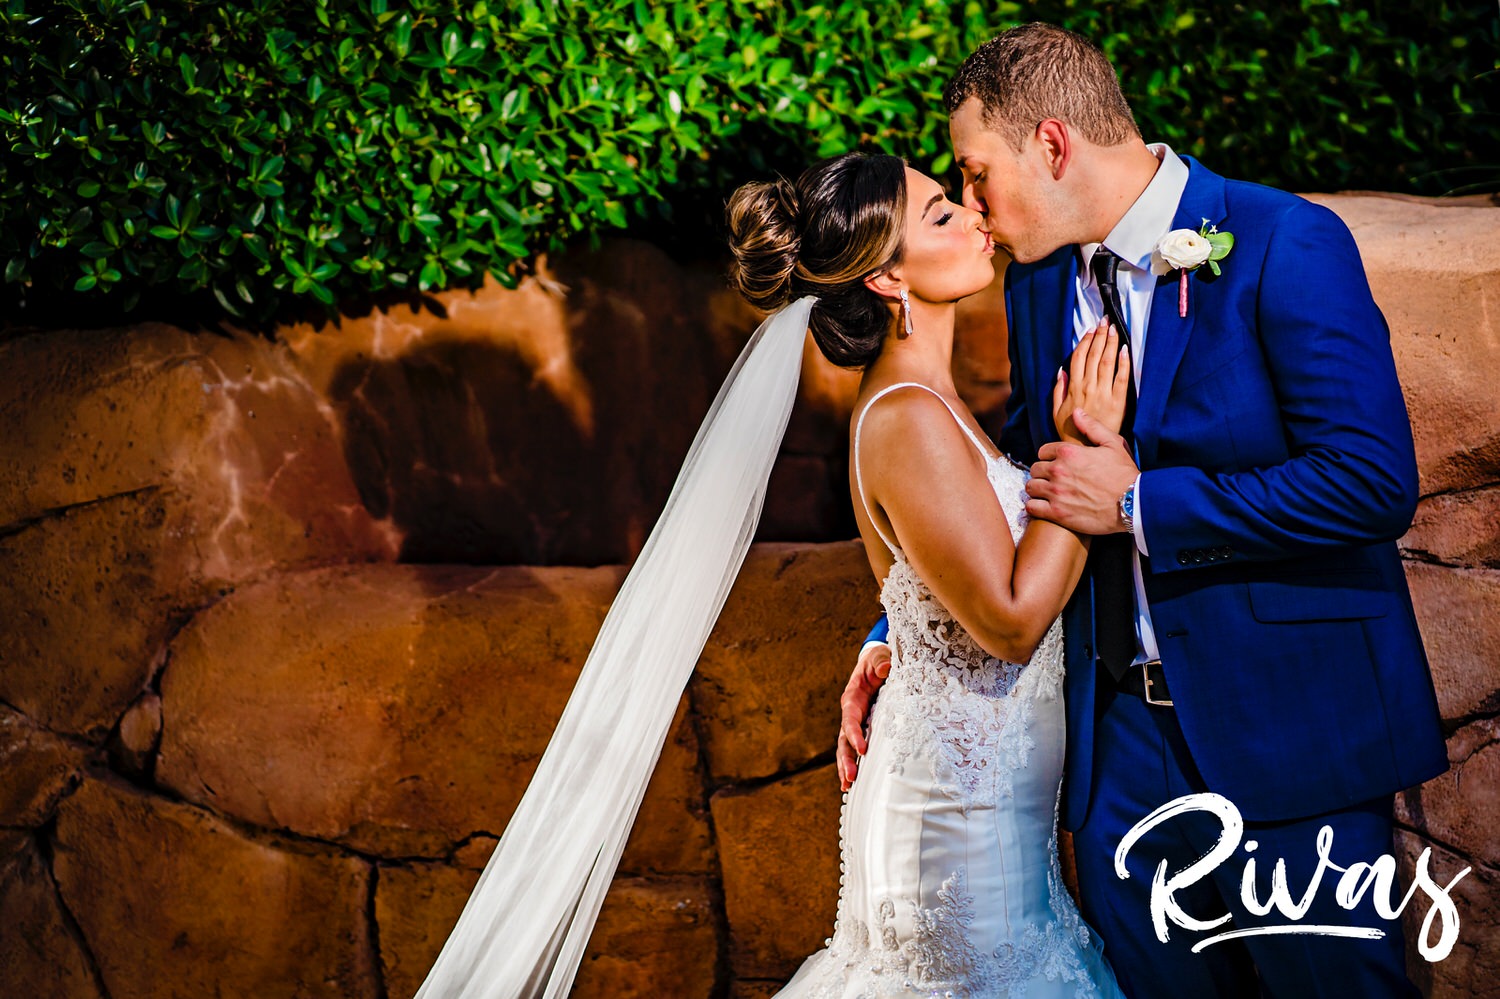 A colorful picture of a bride and groom standing in front of red rocks and greenery embracing and sharing a kiss on their wedding day in Sunny Isles Beach, Florida.